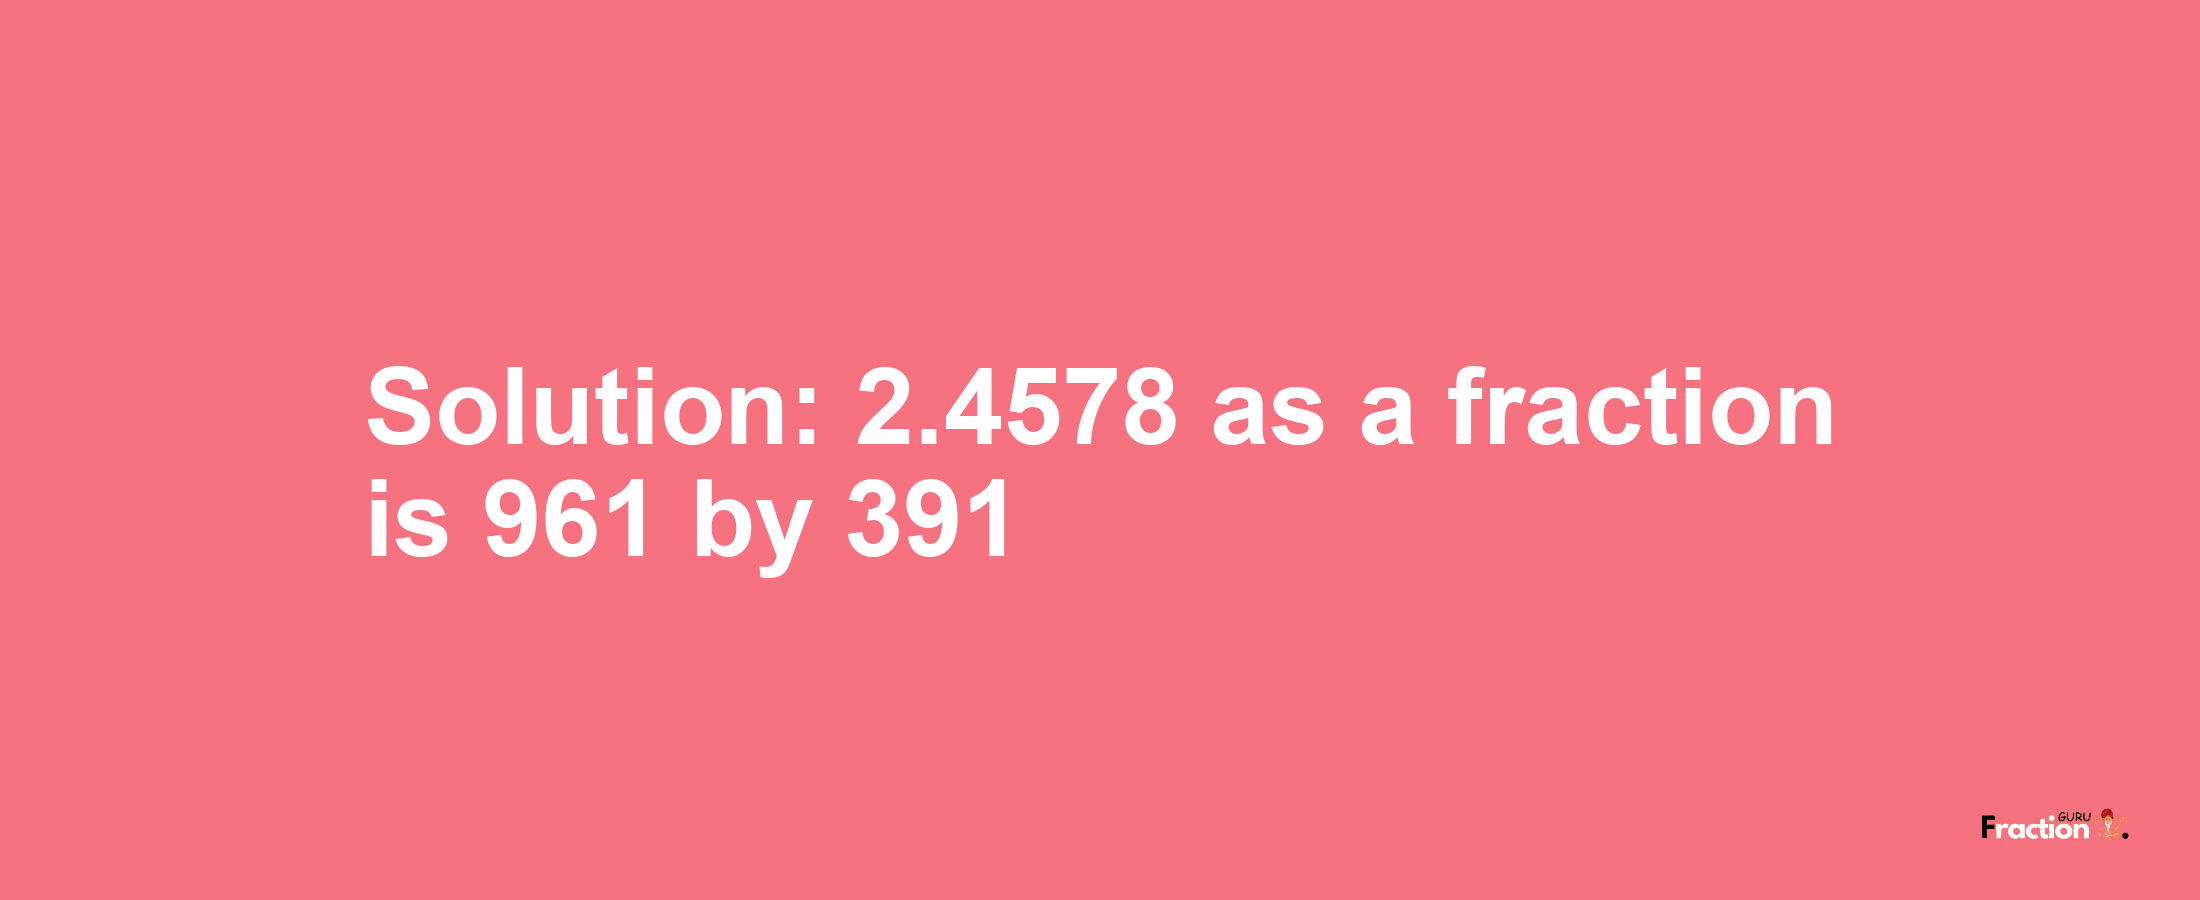 Solution:2.4578 as a fraction is 961/391